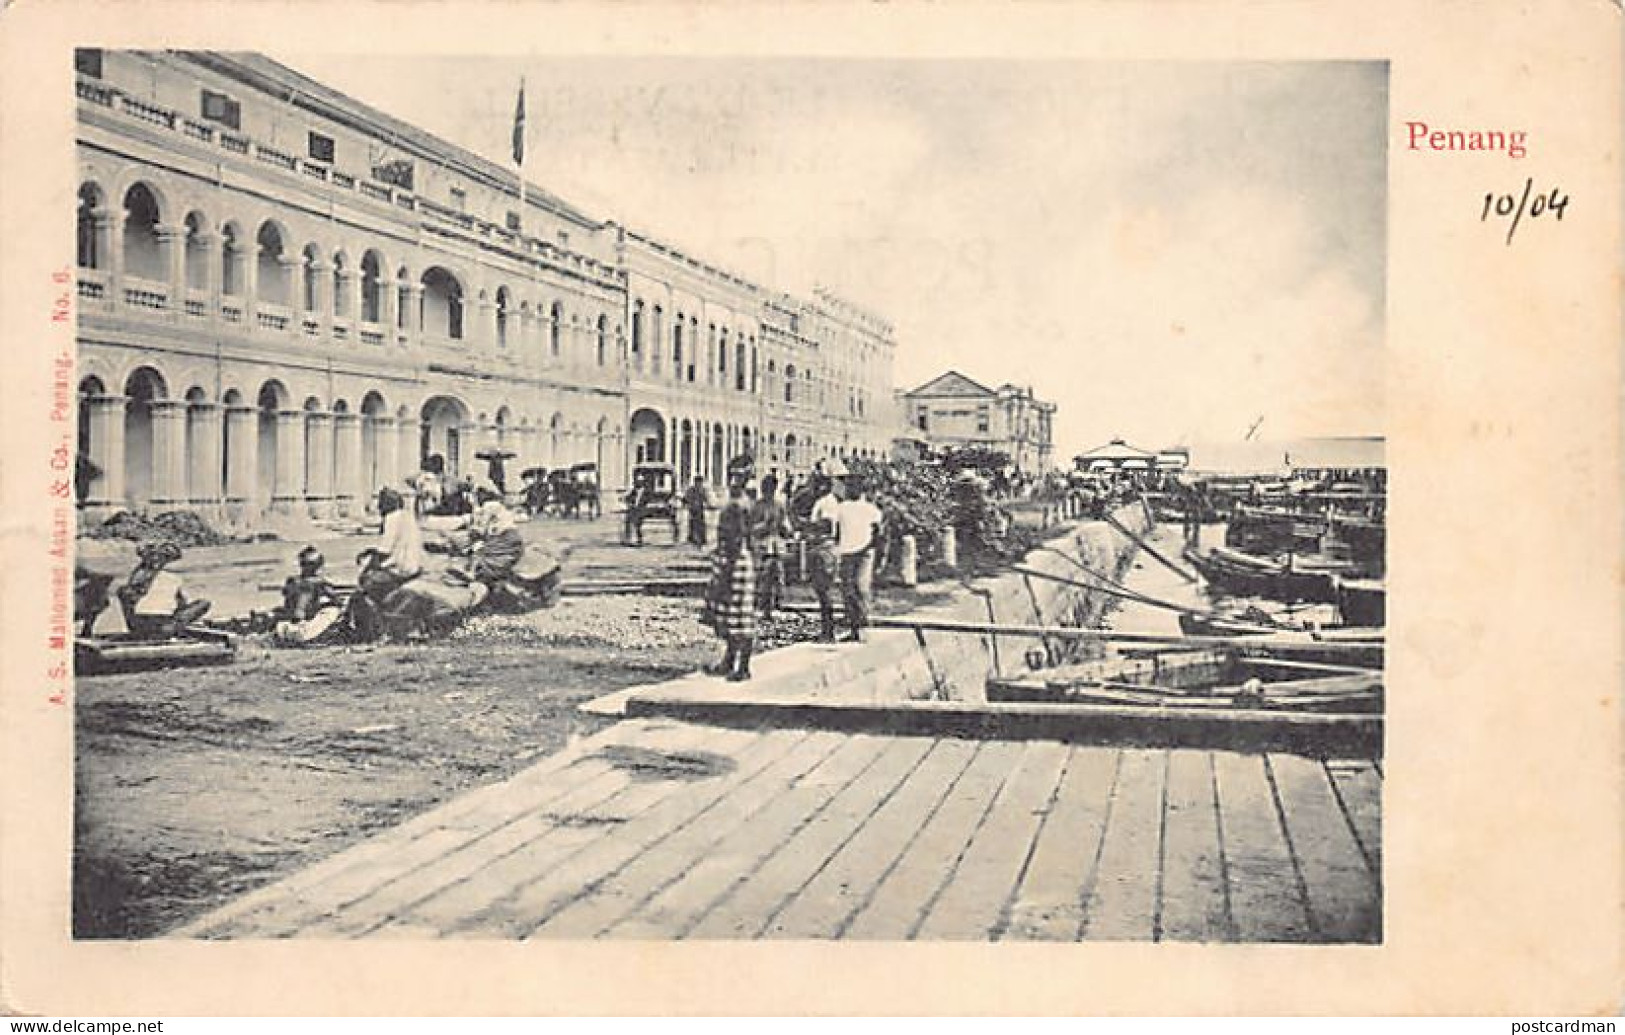 Malaysia - PENANG - The Quays - Publ. A. S. Mahomed Assan & Co. 6 - Malasia